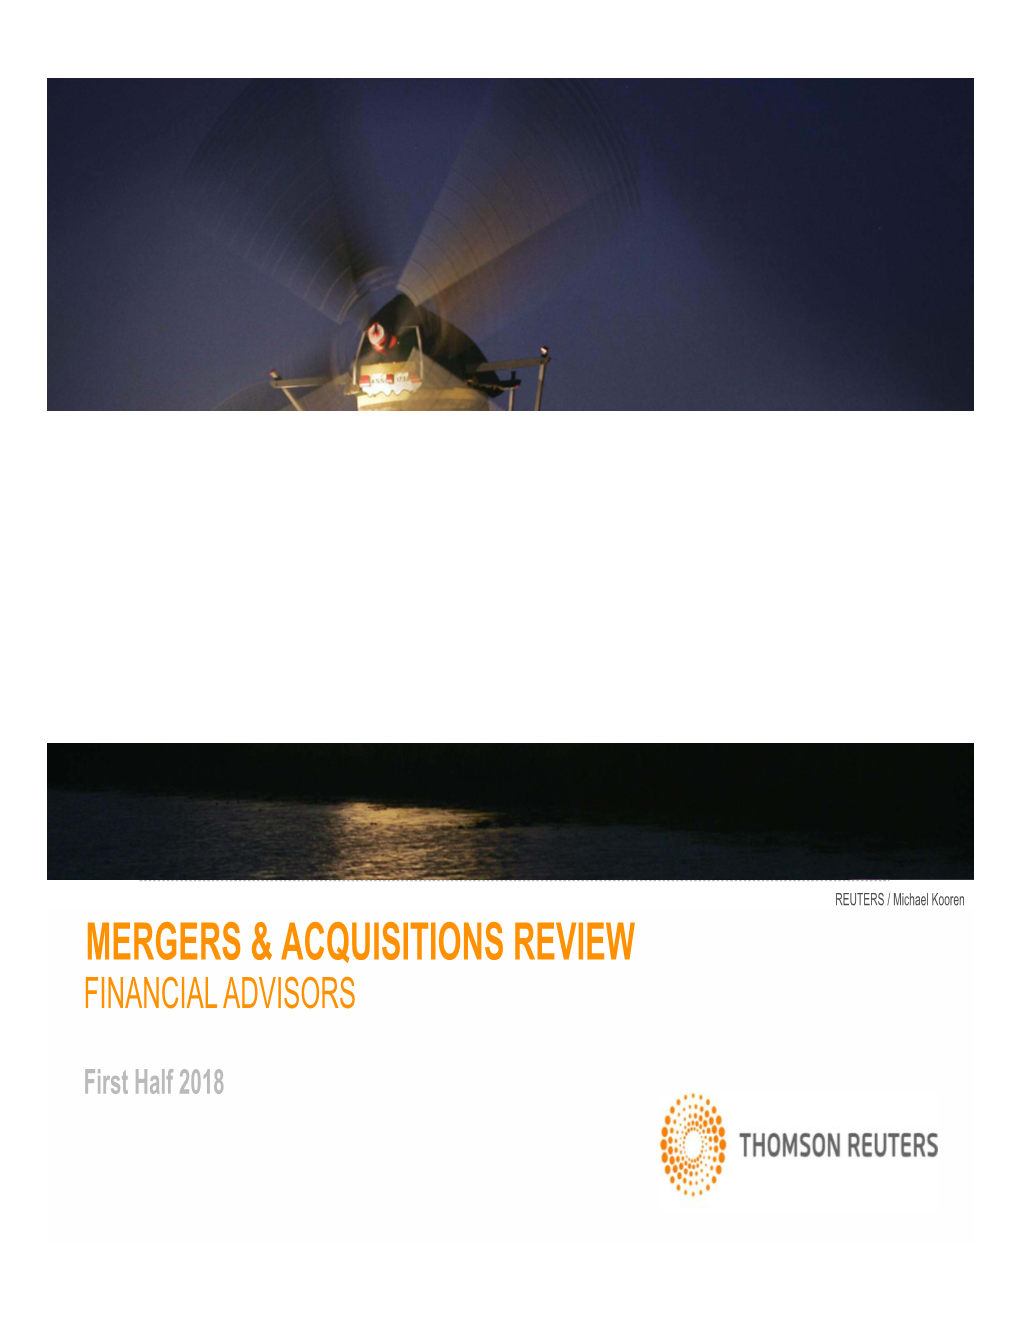 Mergers & Acquisitions Review